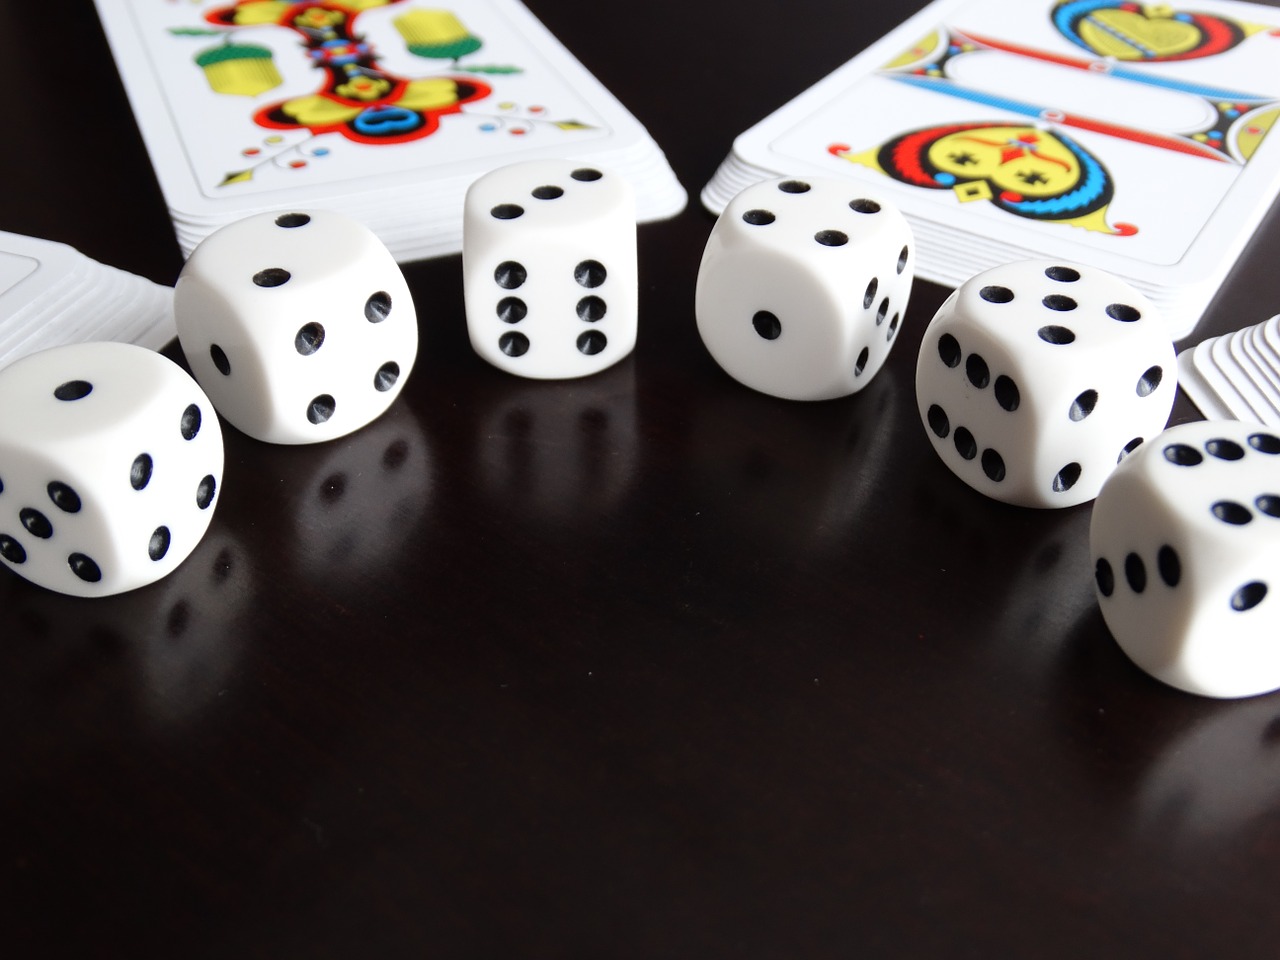 How to make your gambling experience at online casinos much better